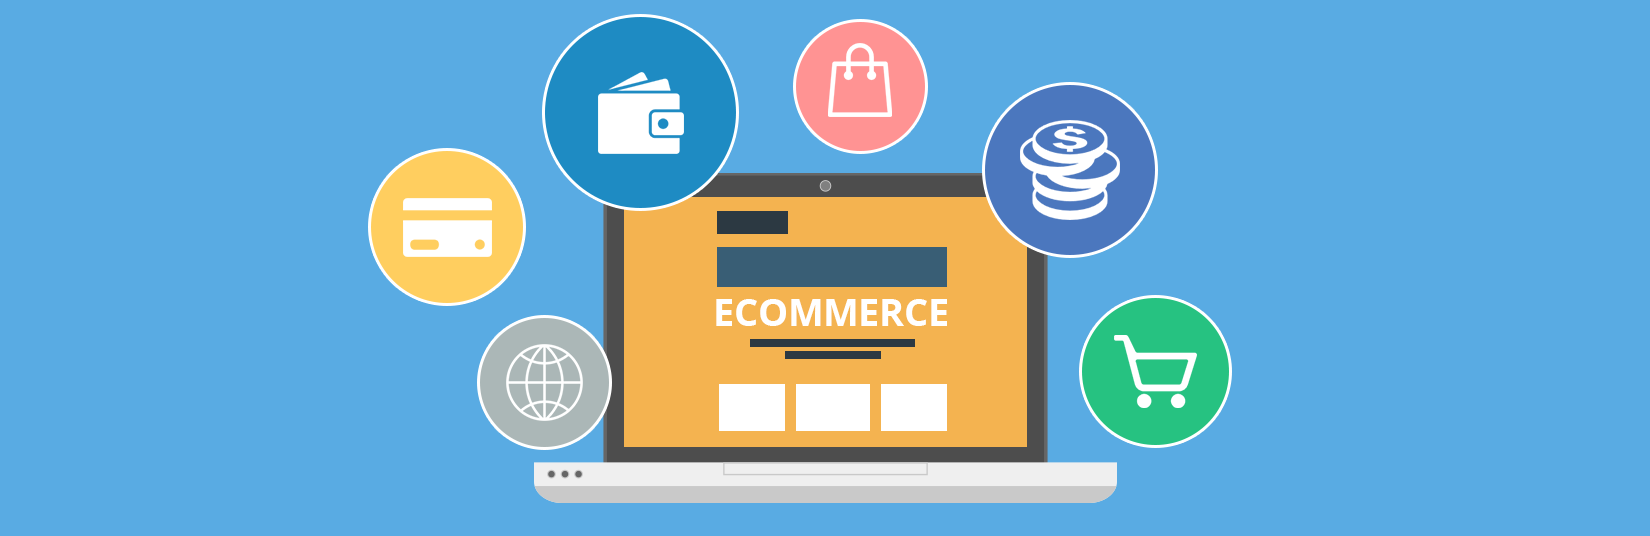 Why WordPress is ideal for e-commerce?